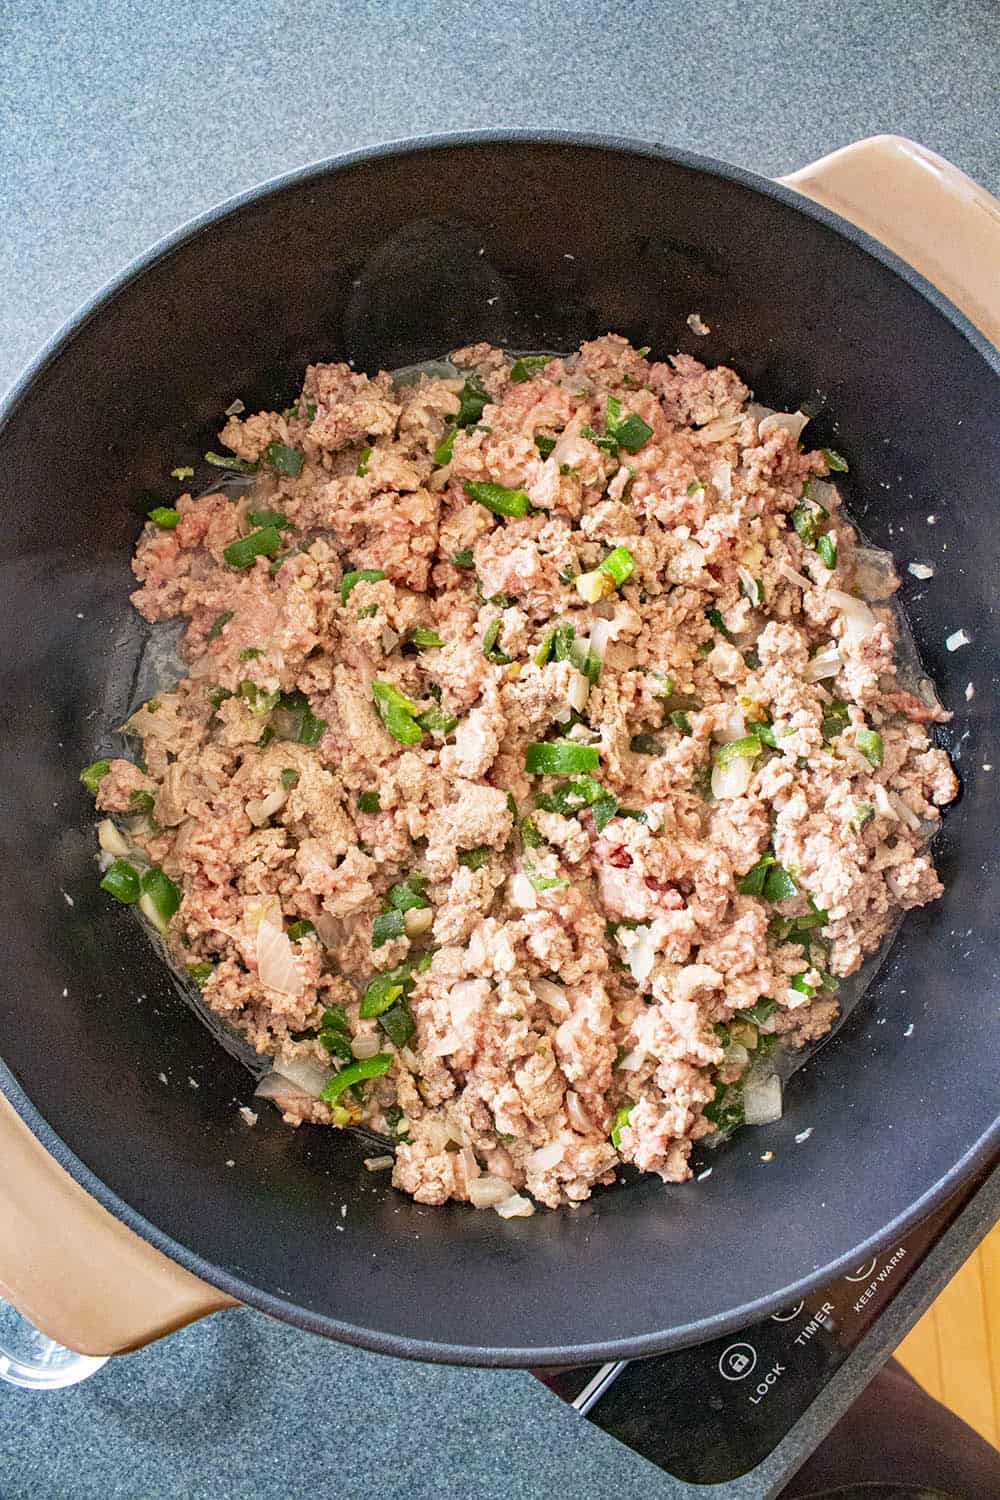 Cooking down the ground meat with peppers, onion and garlic in a pan